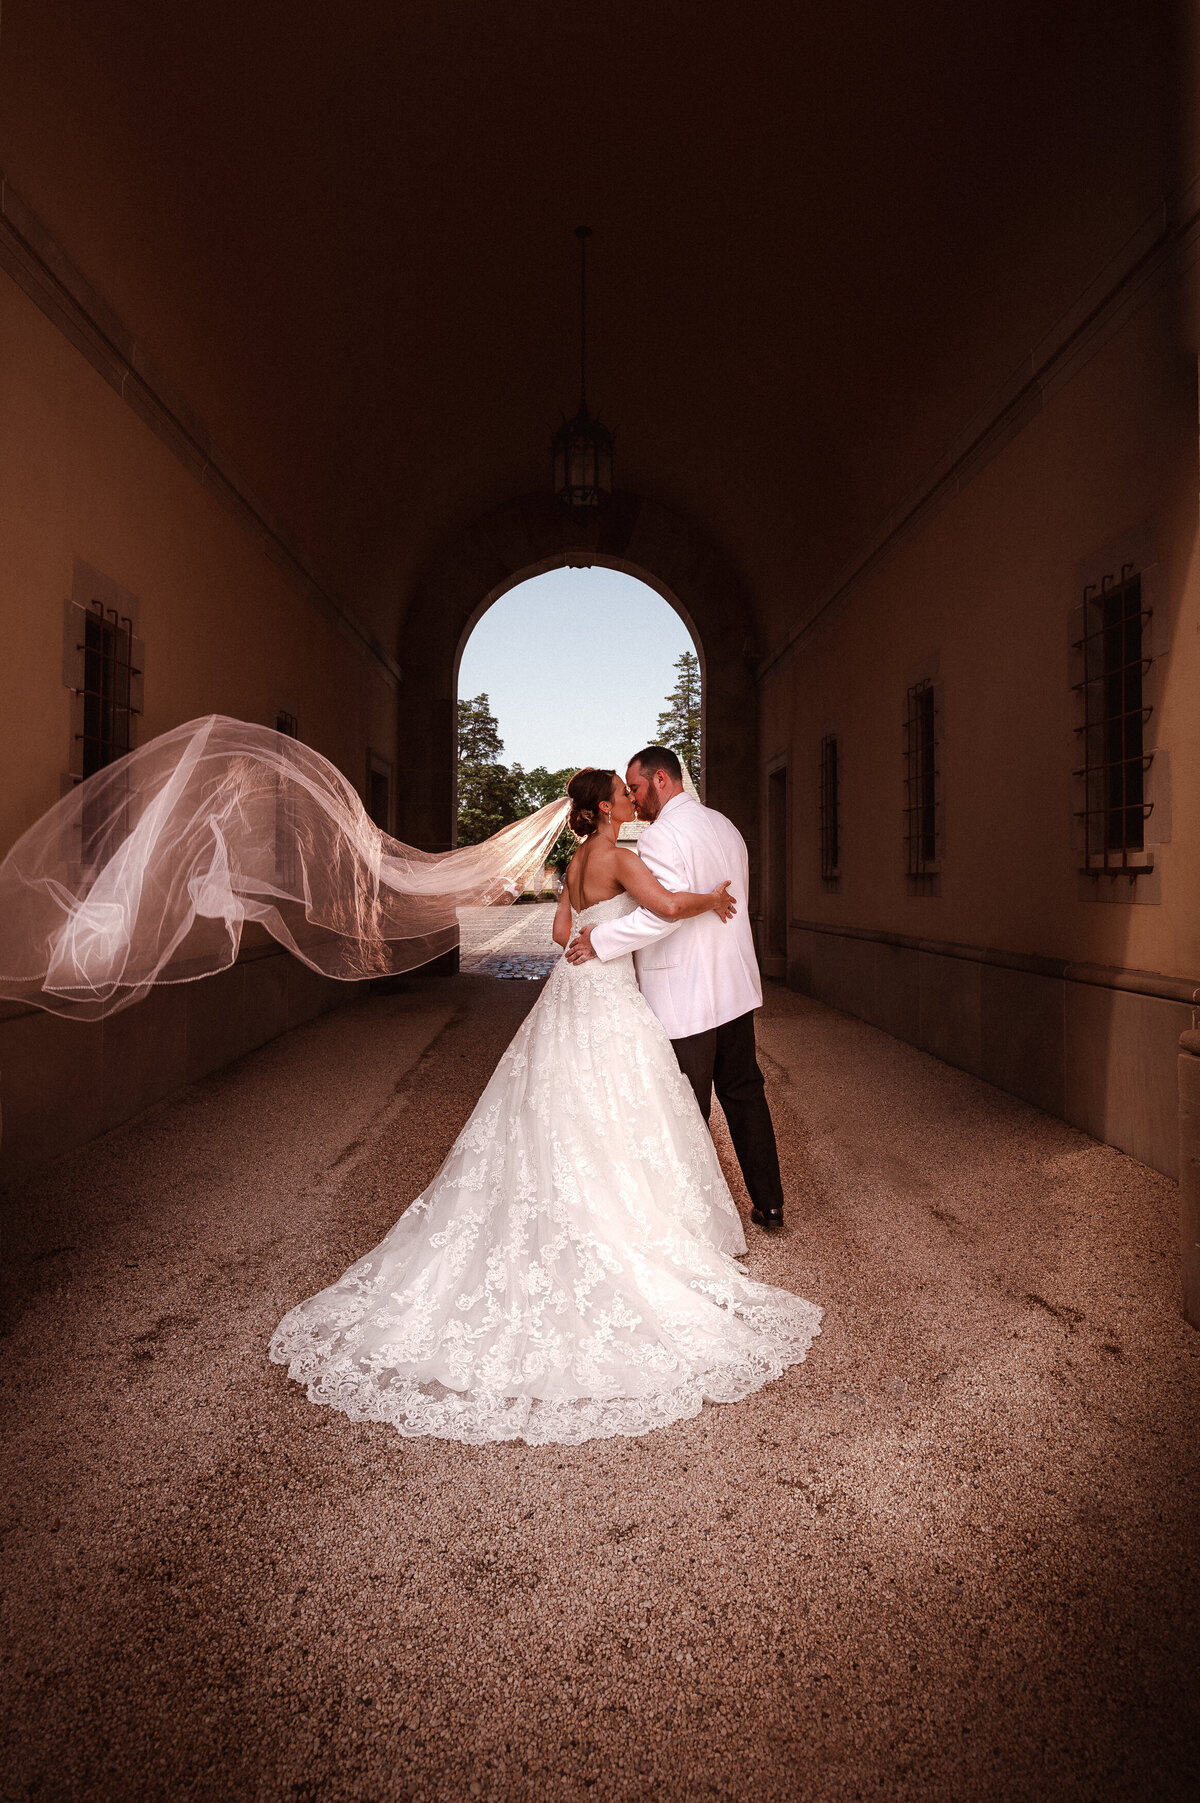 oheka-castle-wedding-photos-by-suess-moments-nyc-nj-photographer (46 of 117)